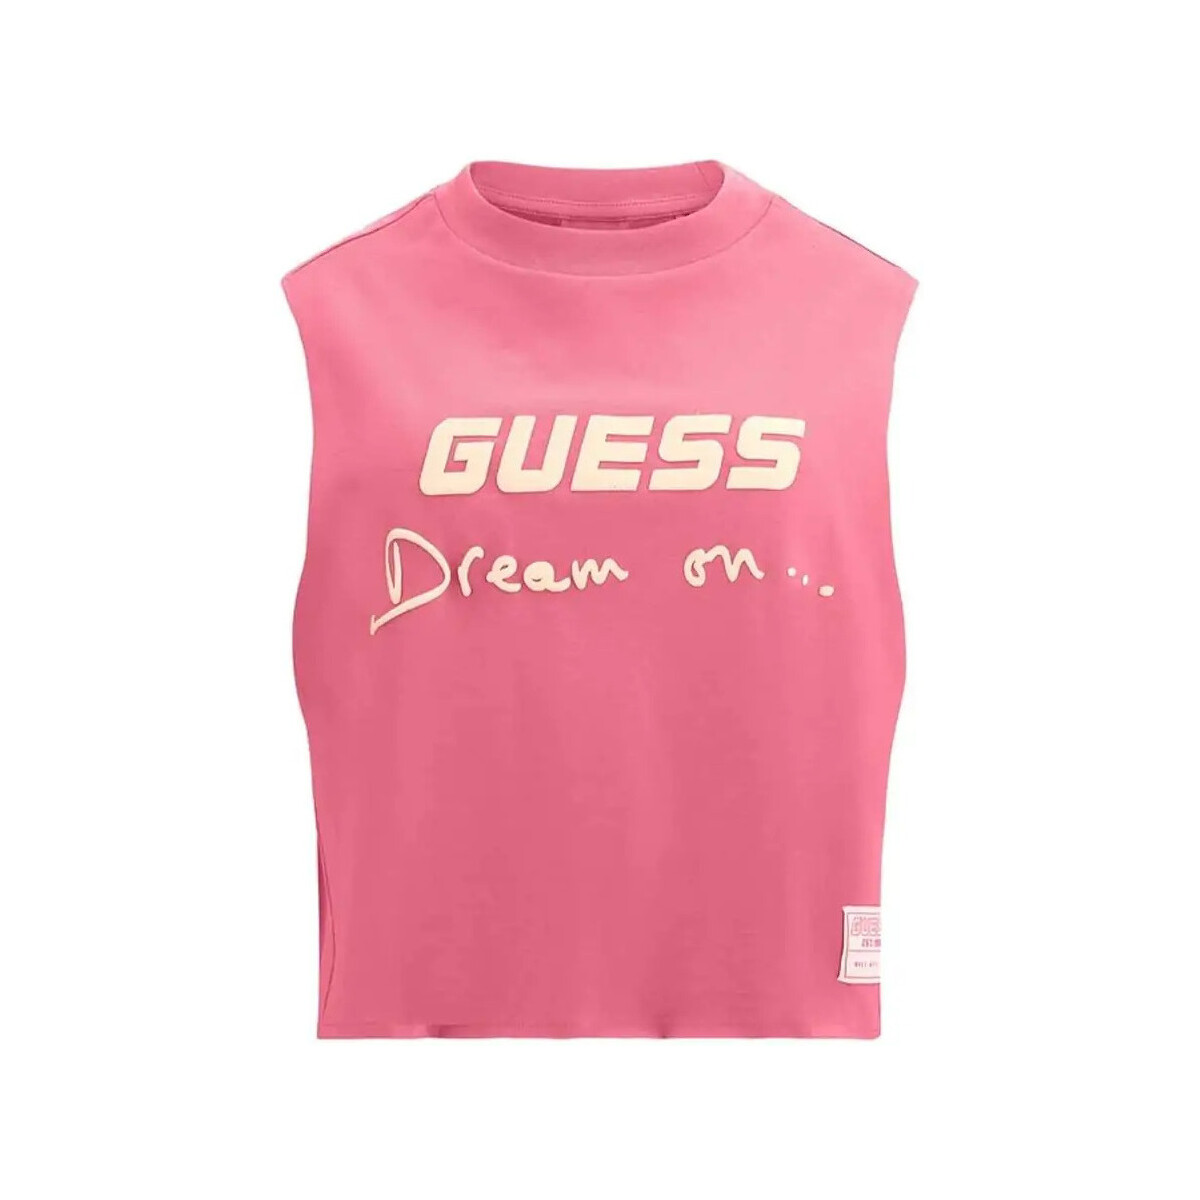 Kleidung Damen Tops Guess Dream on style Rosa